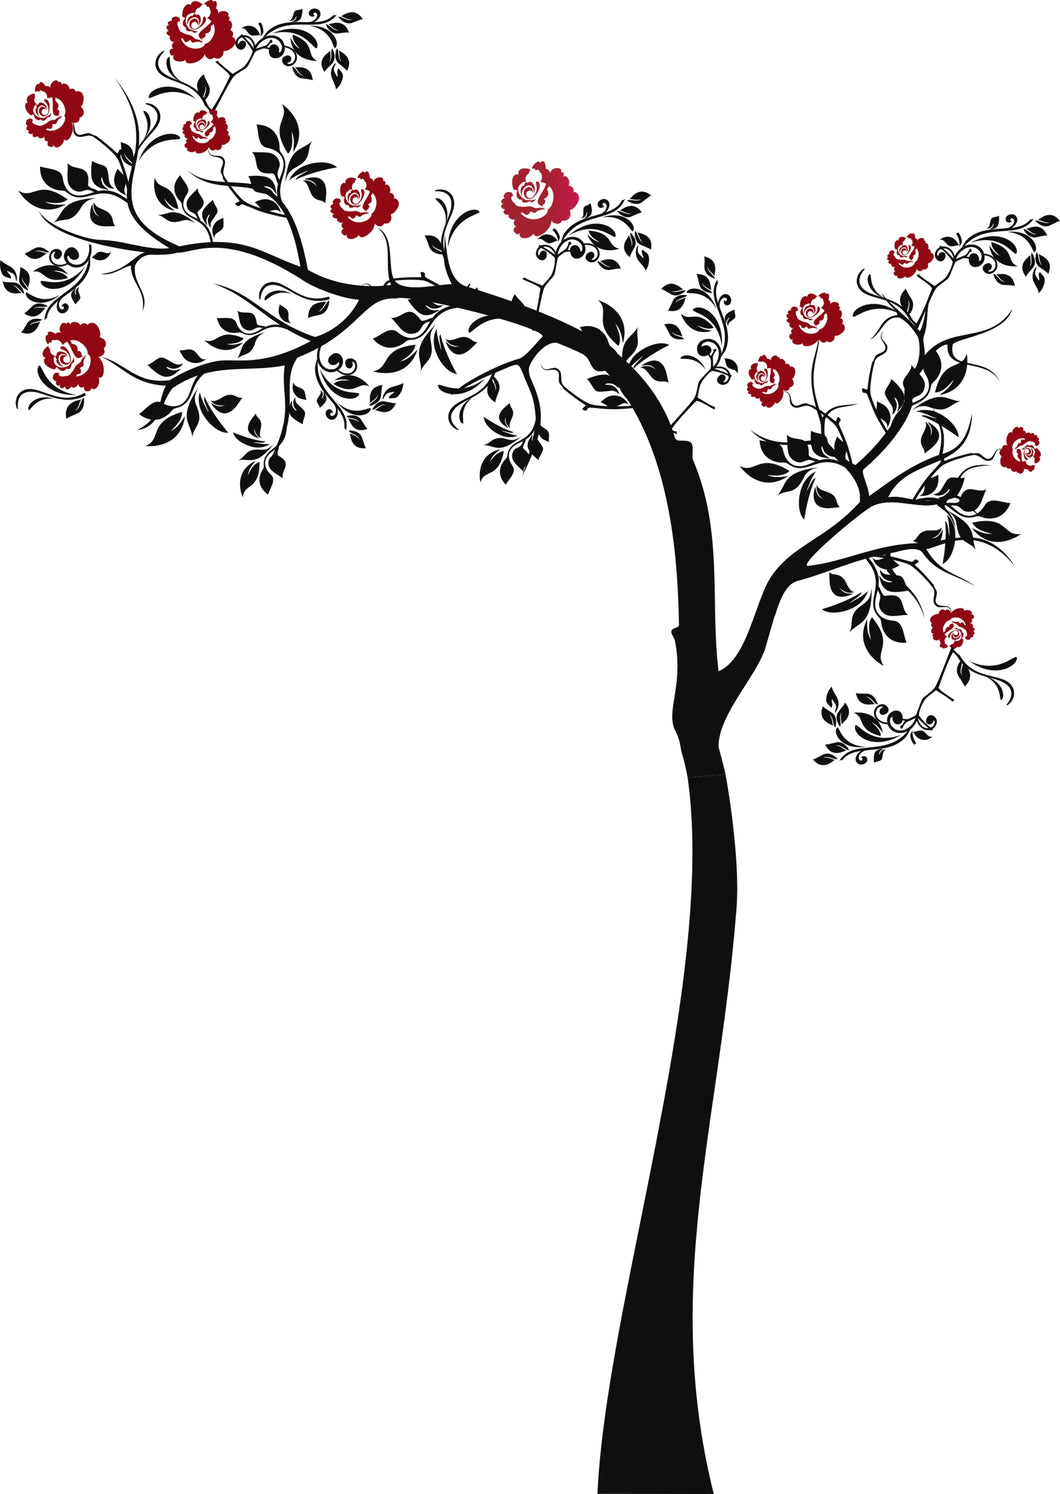 TREE ROSES ON BRANCHES Sizes Reusable Stencil Decor Craft Art Shabby Chic 'Rose6'